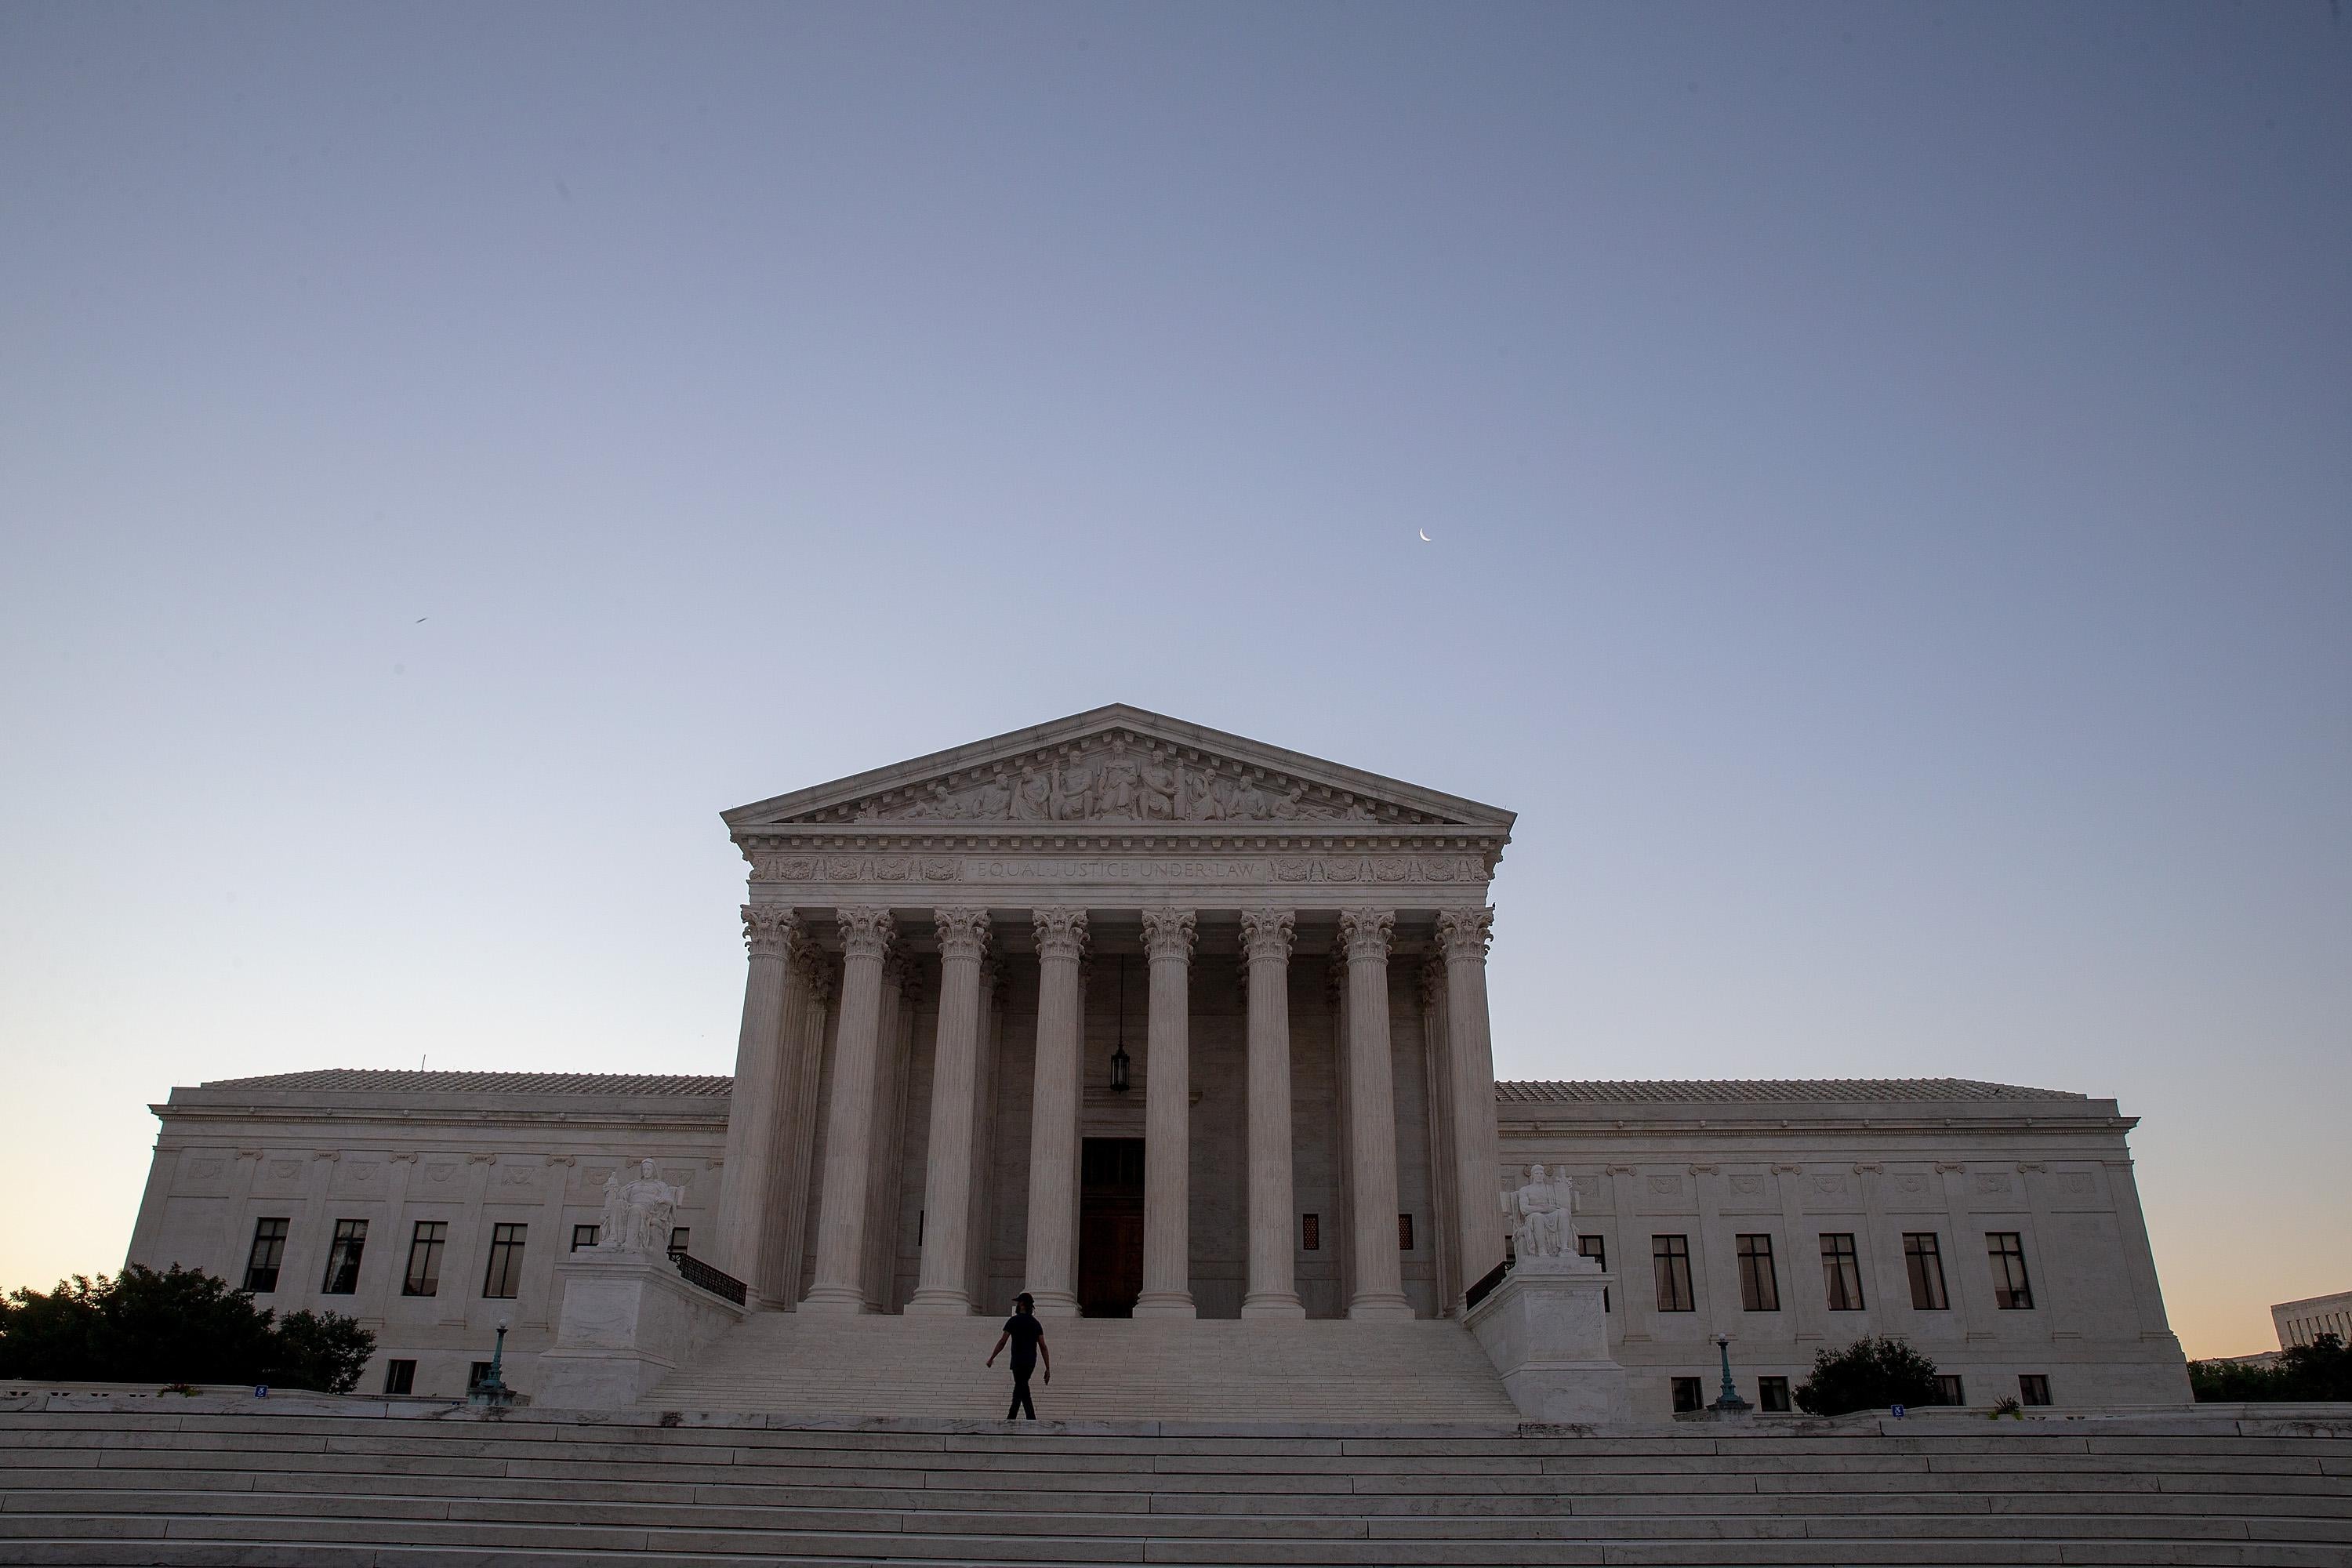 The Supreme Court building at sunrise.